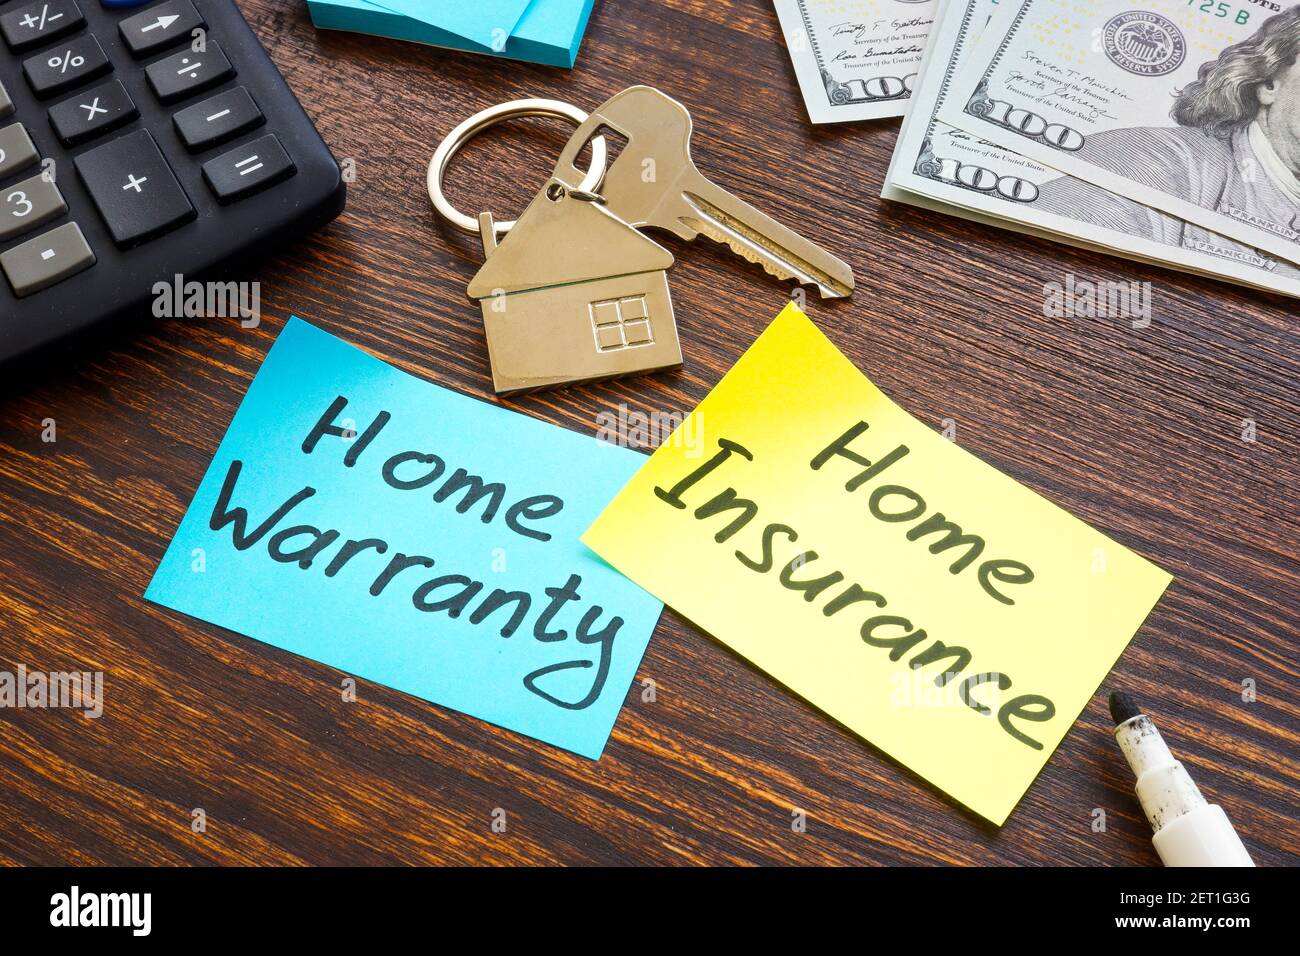 Home warranty vs home insurance and key on the desk. Stock Photo